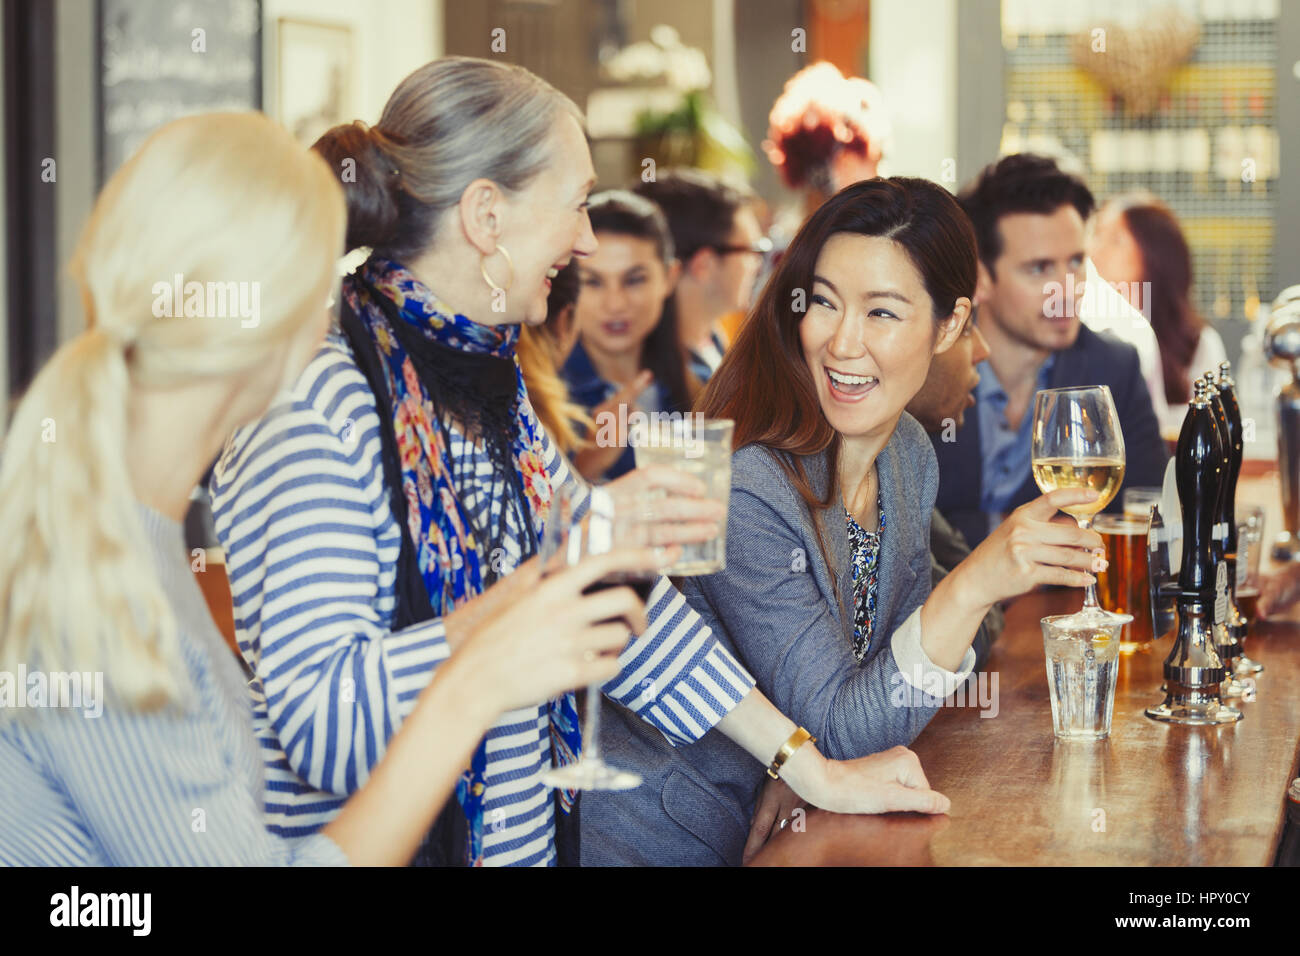 Smiling women friends drinking wine at bar Stock Photo